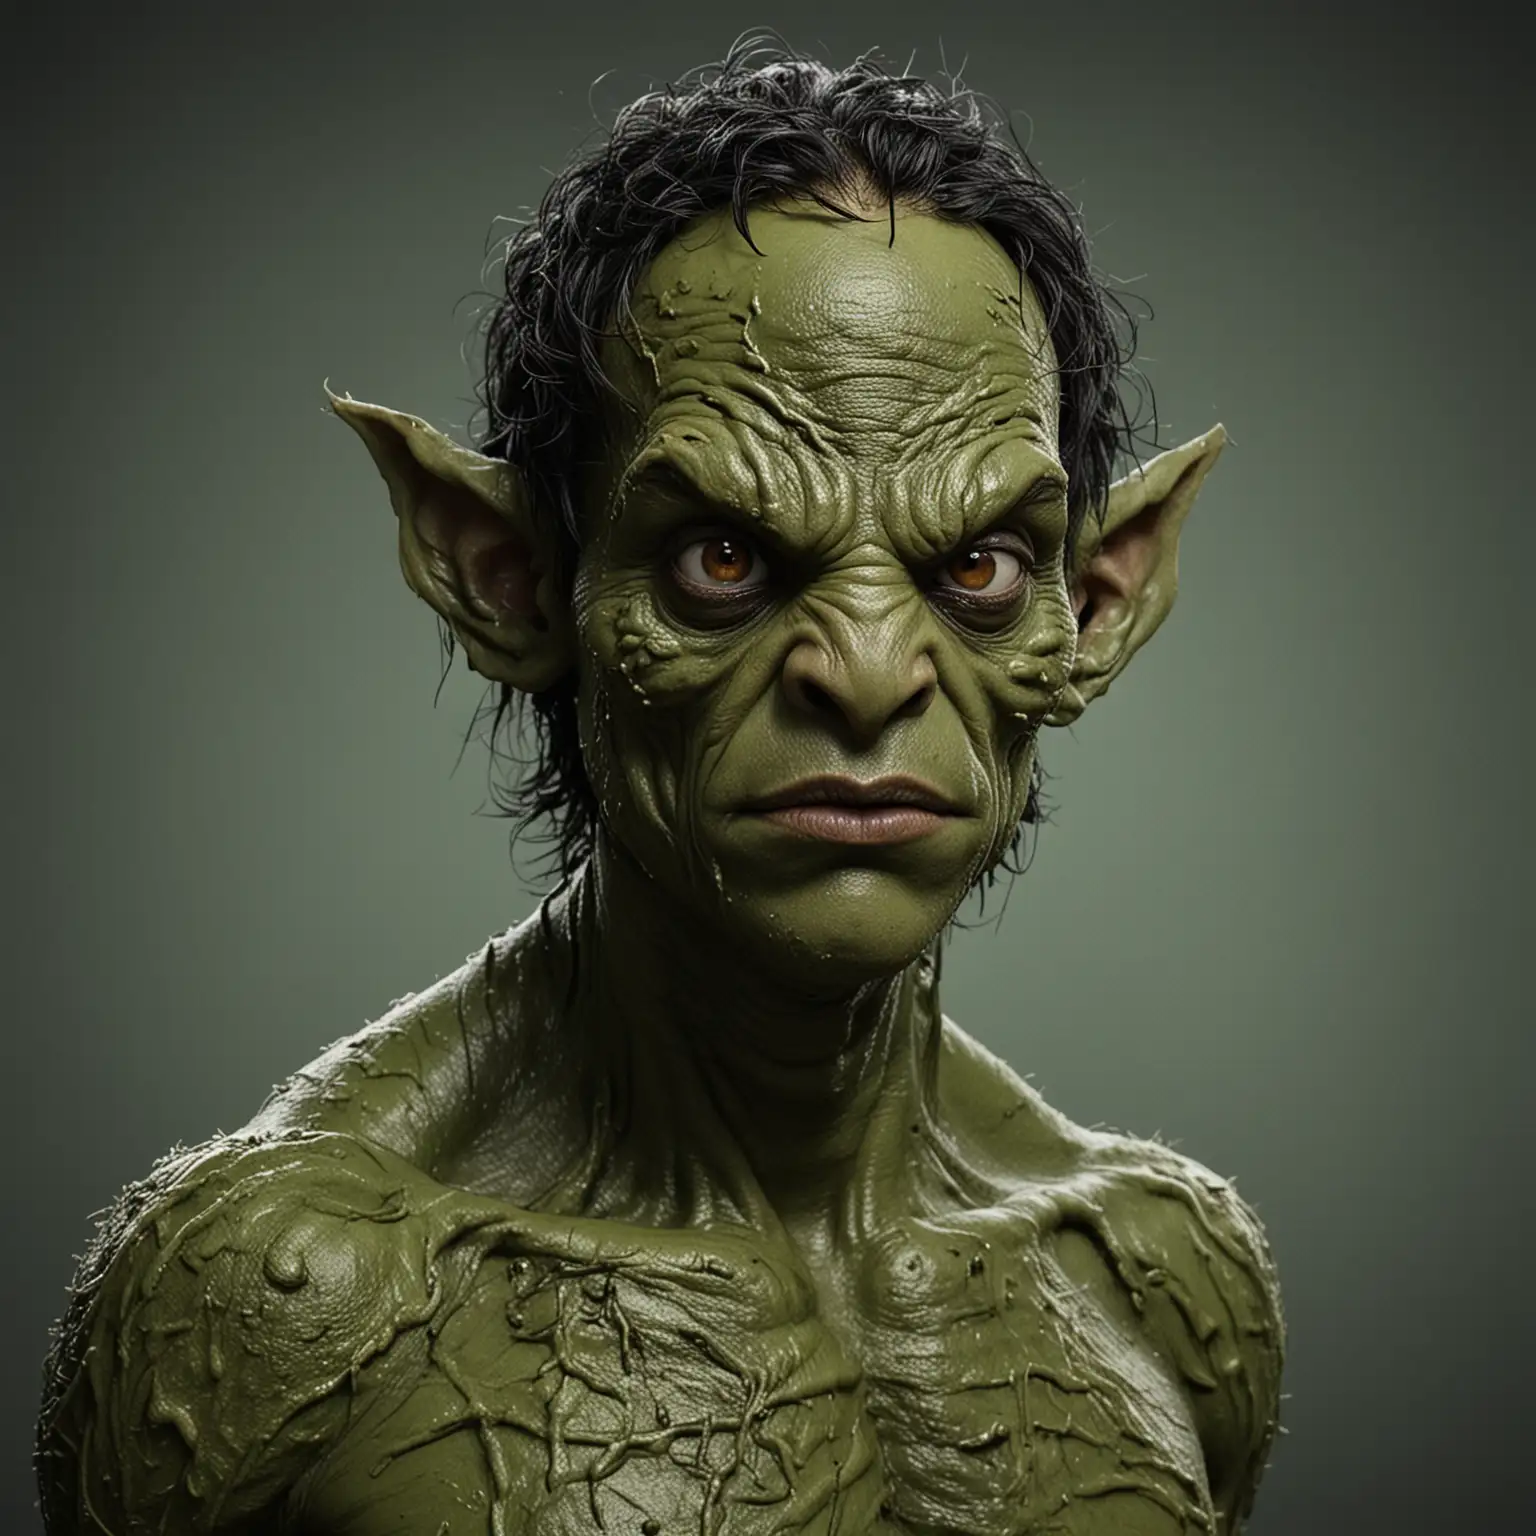 create a swamp creature using the face of vivek ramaswamy on the file attachment